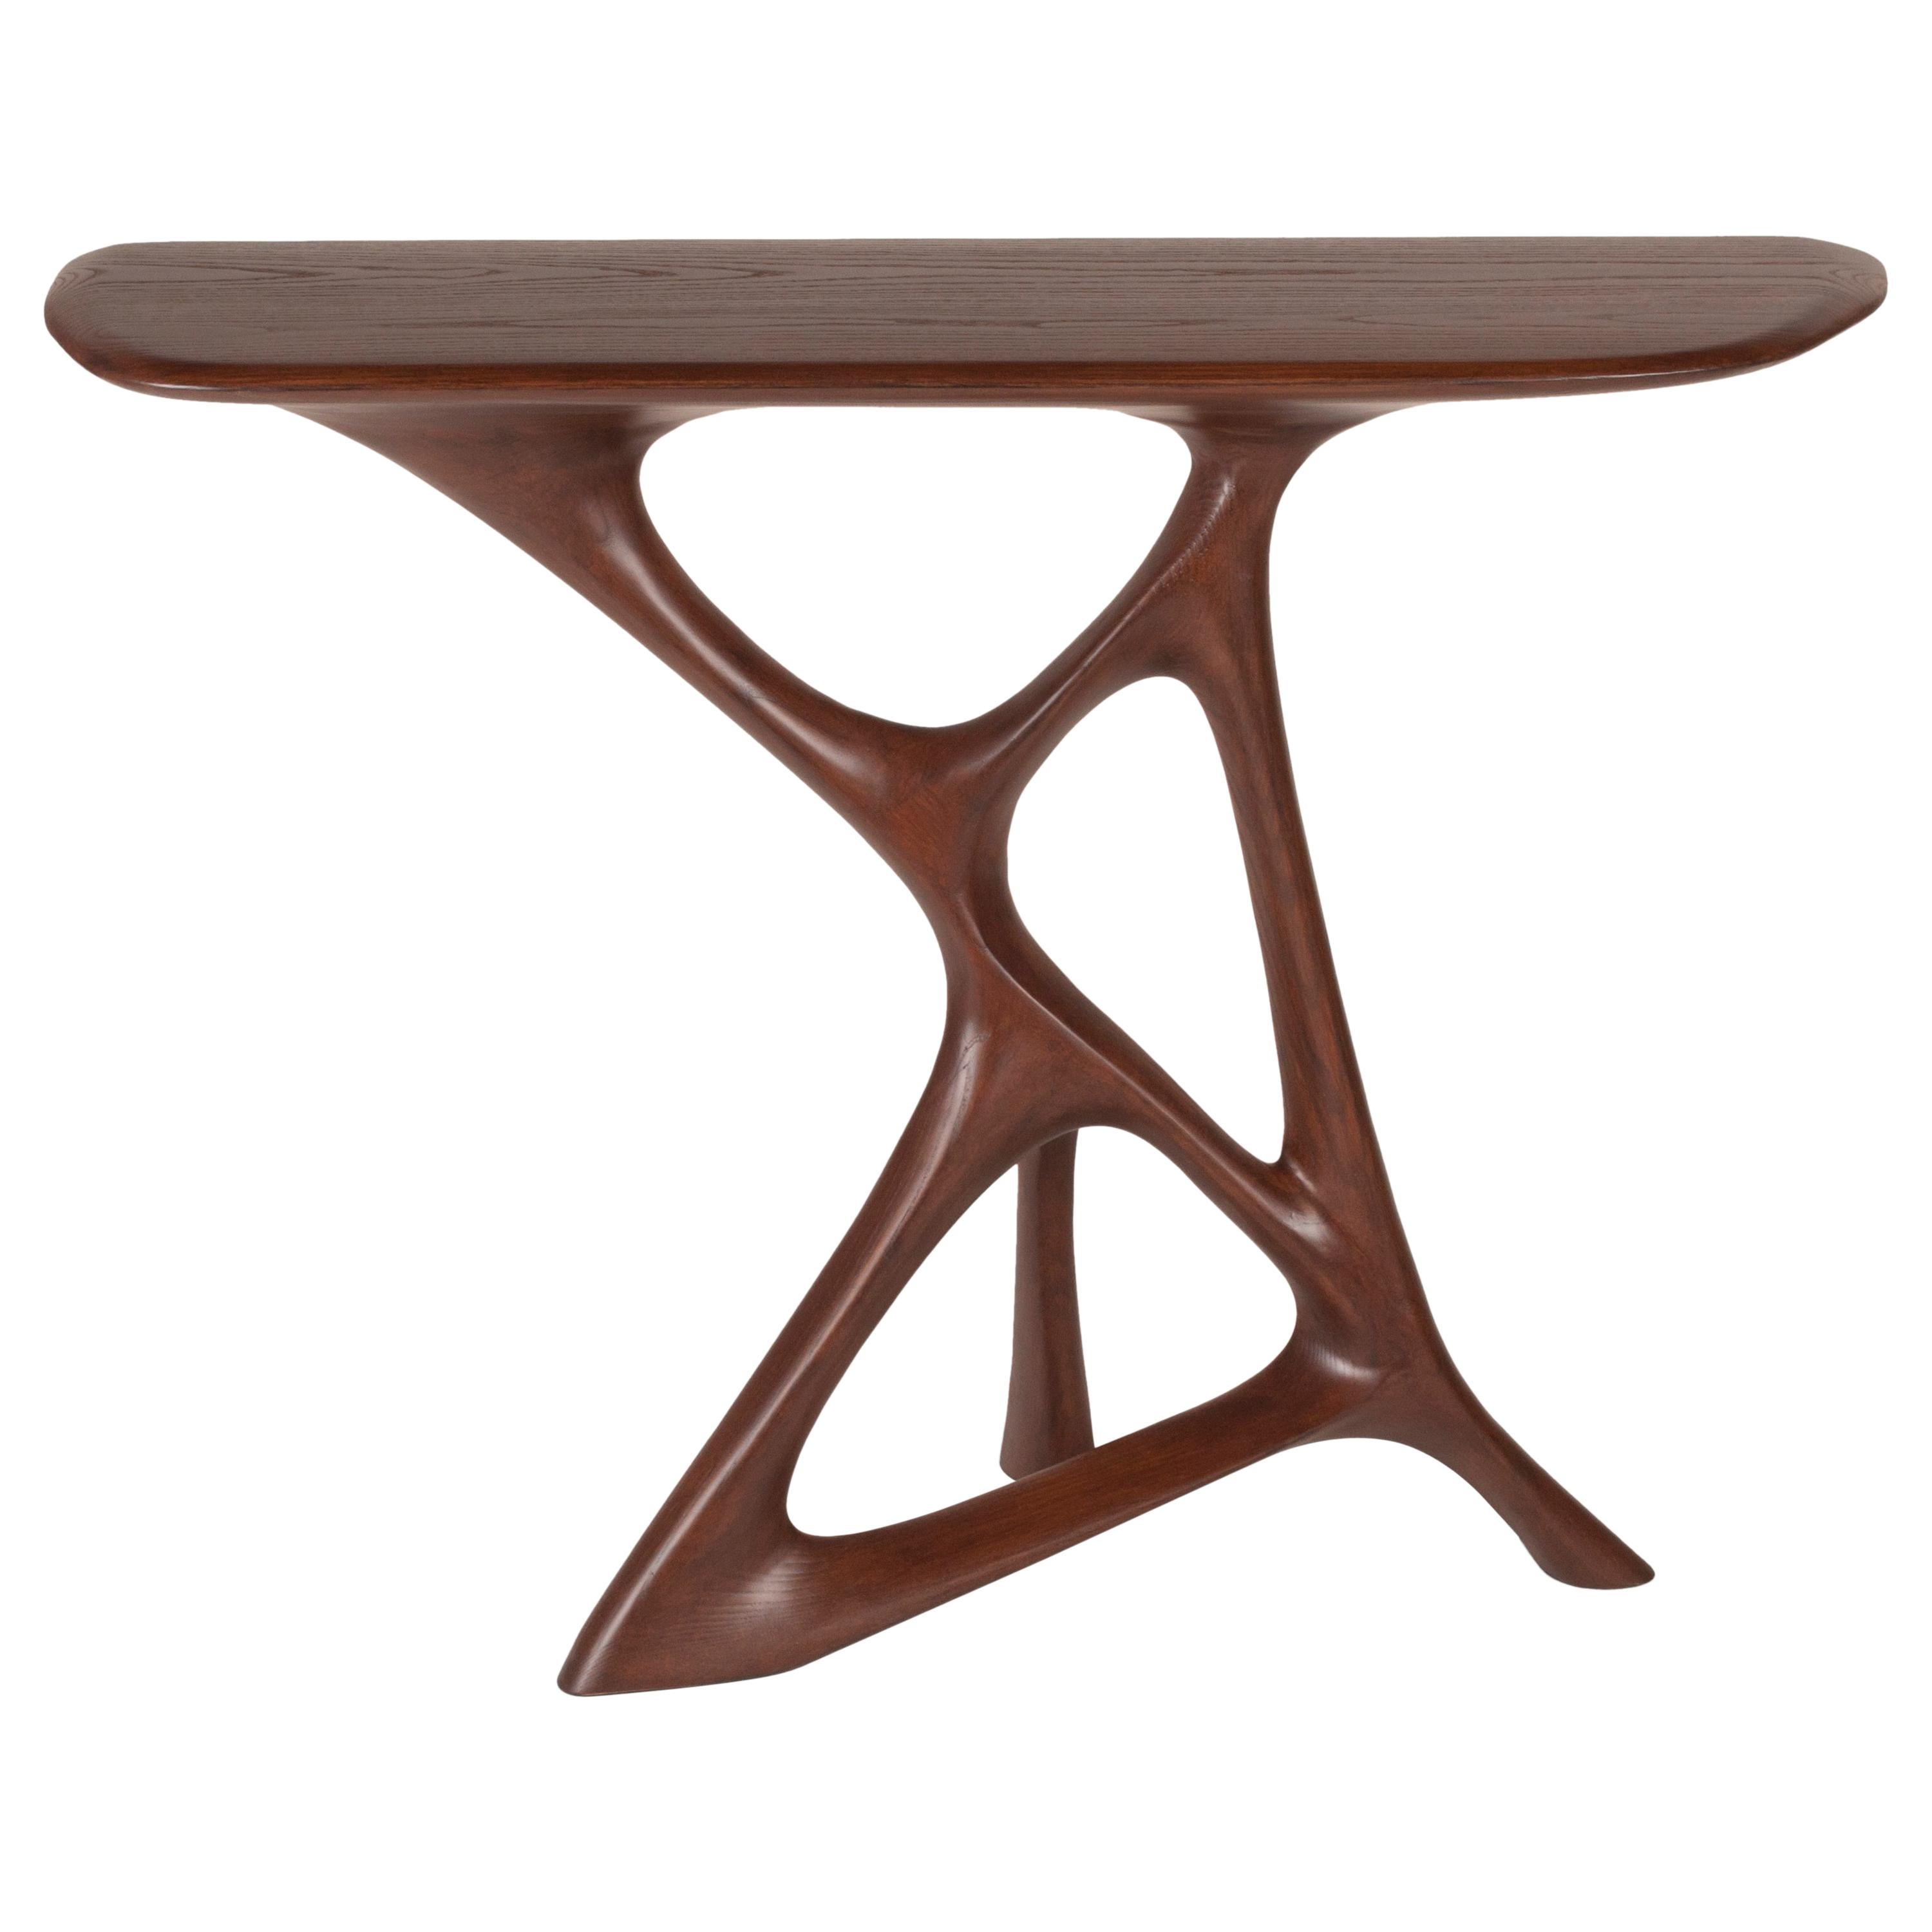 Amorph Anika Console table in Walnut stain on Ash wood